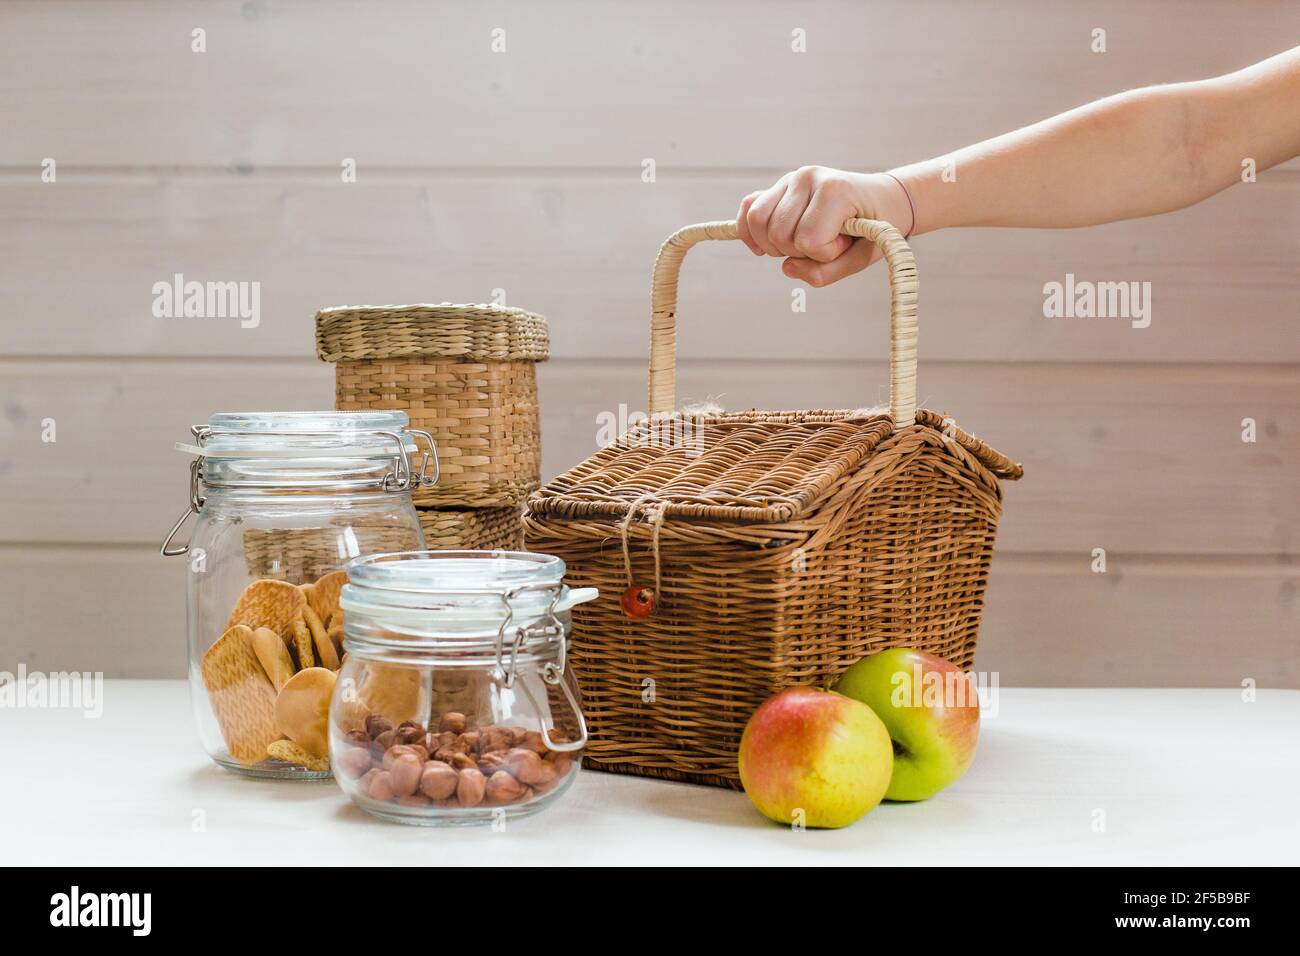 Glass cans with nuts and cookies and apples on wooden table, zero waste picnic concept child hand Stock Photo